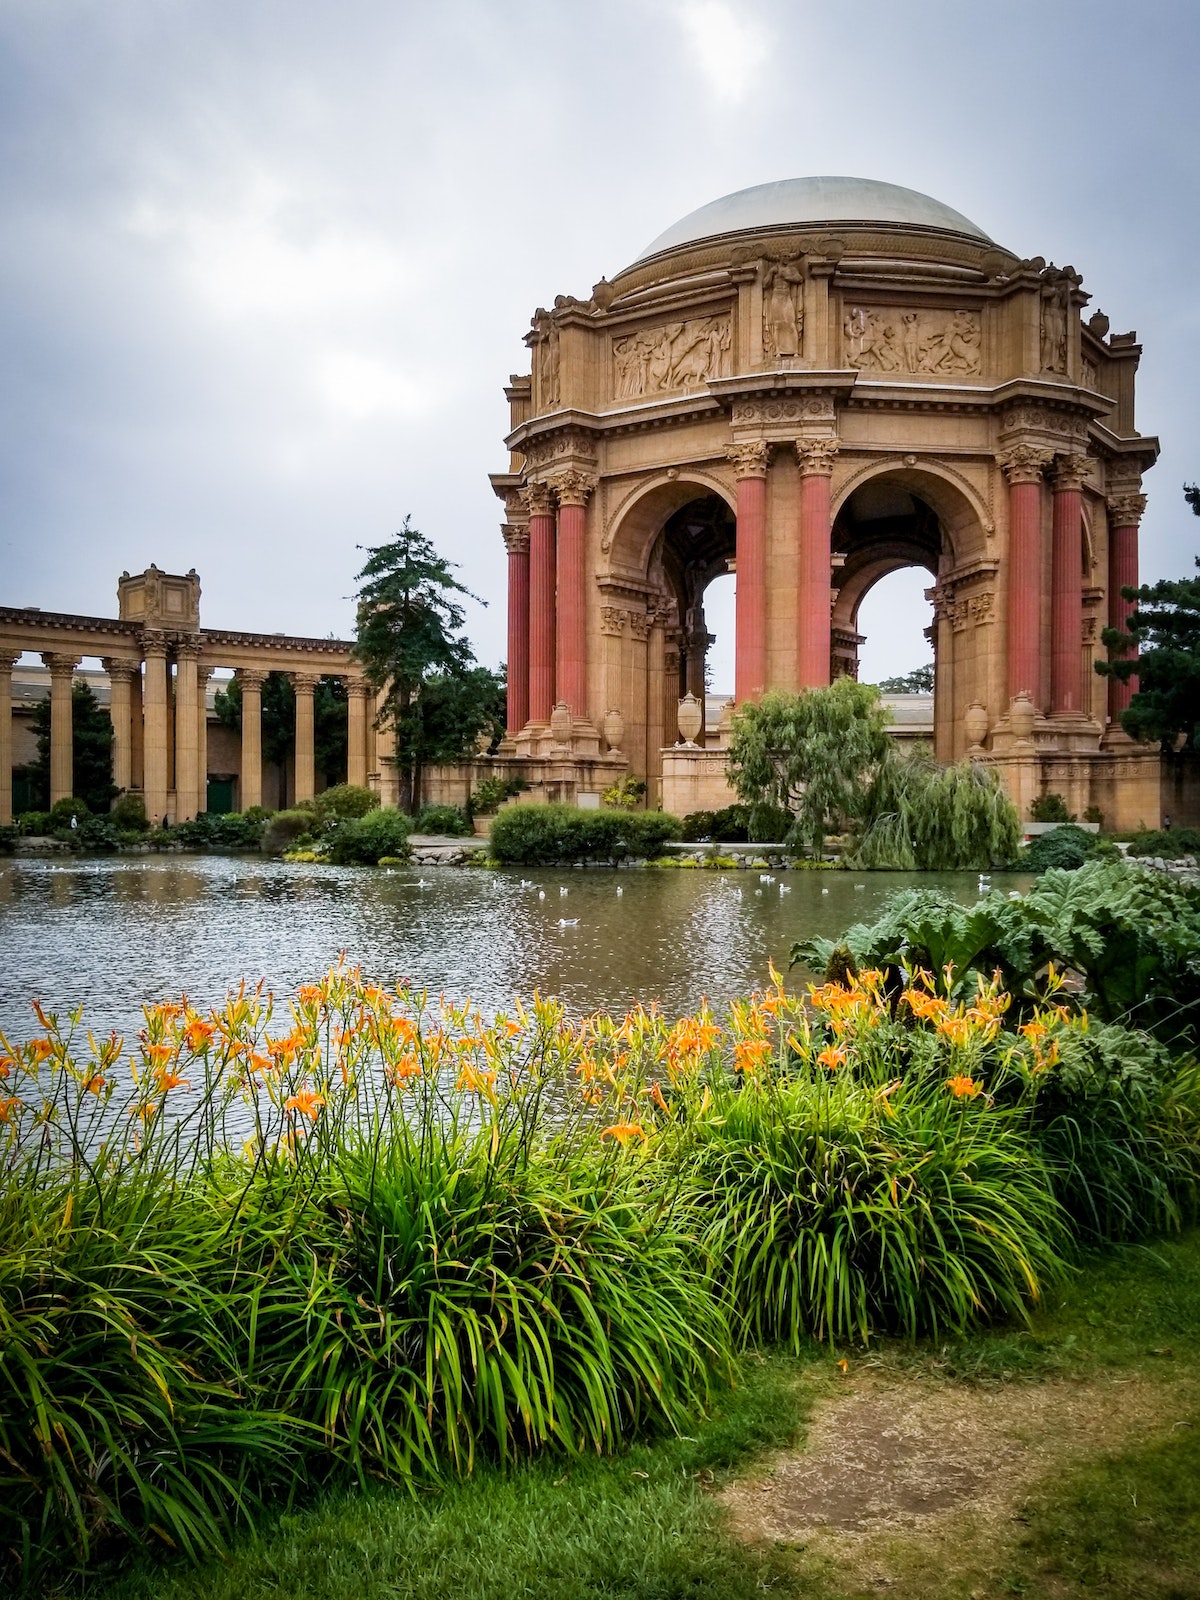 Shot of the domed rotunda of the Palace of Fine Arts in San Francisco, with a pond and lots of beautiful foliage on the banks 